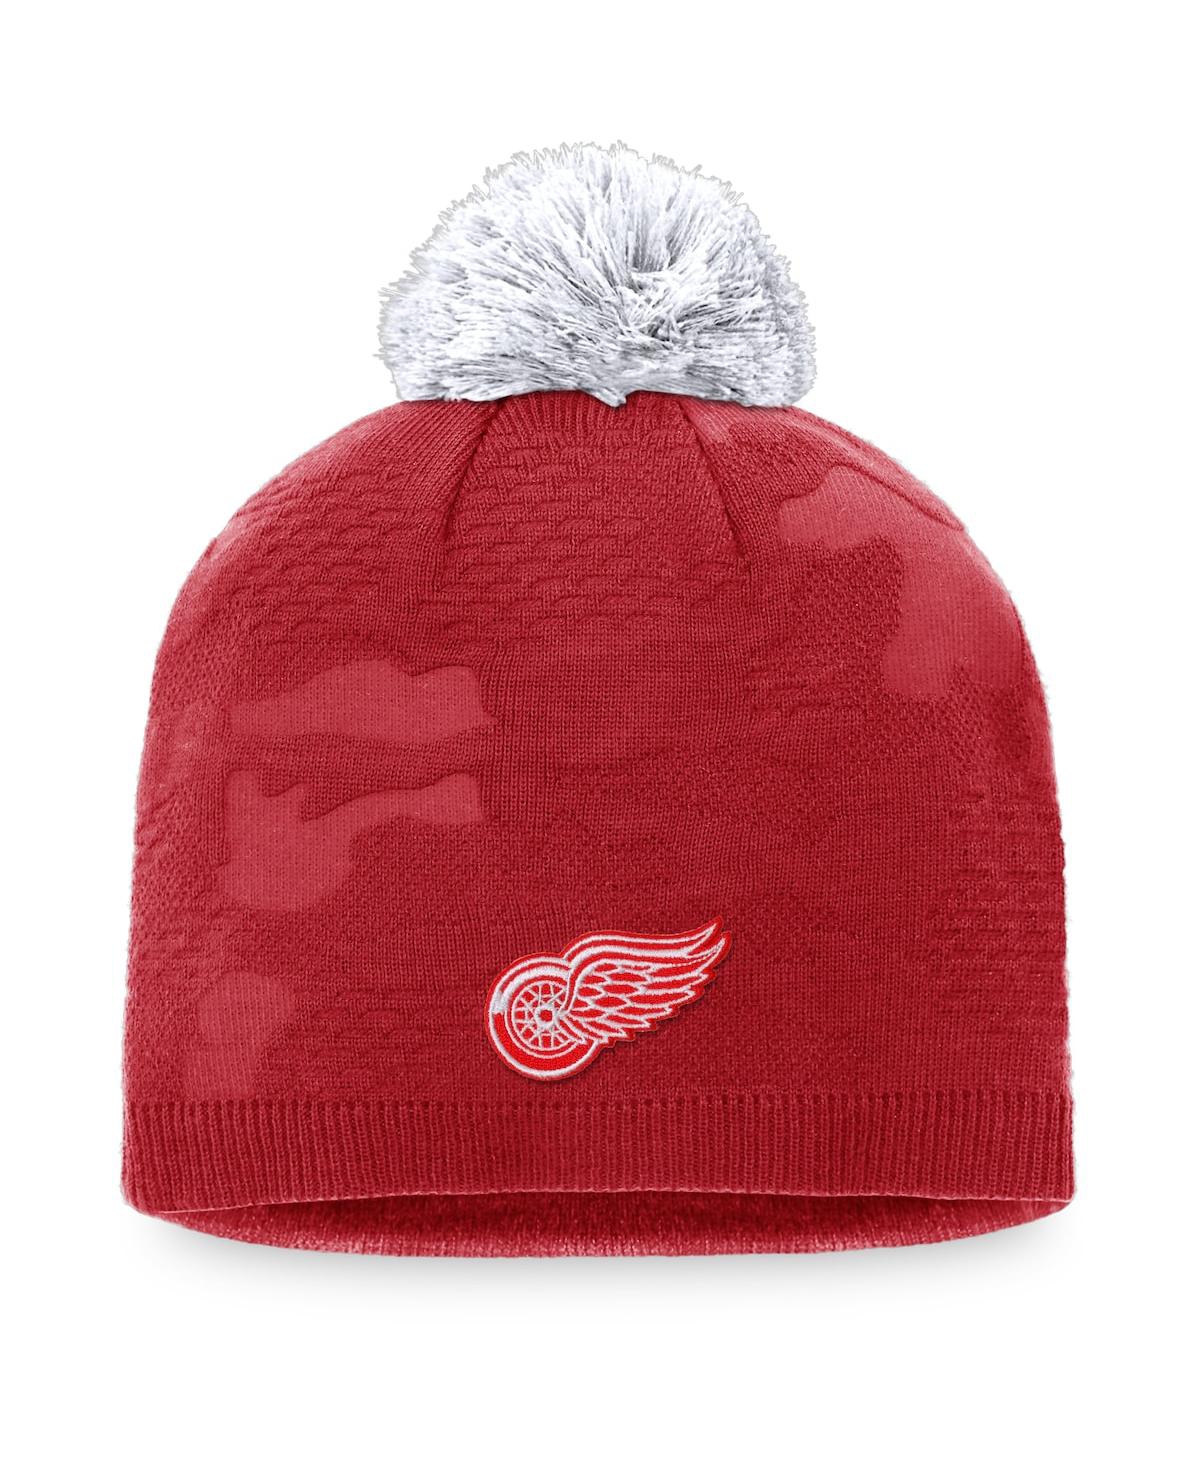 Women's Fanatics Red, White Detroit Red Wings Authentic Pro Team Locker Room Beanie with Pom - Red